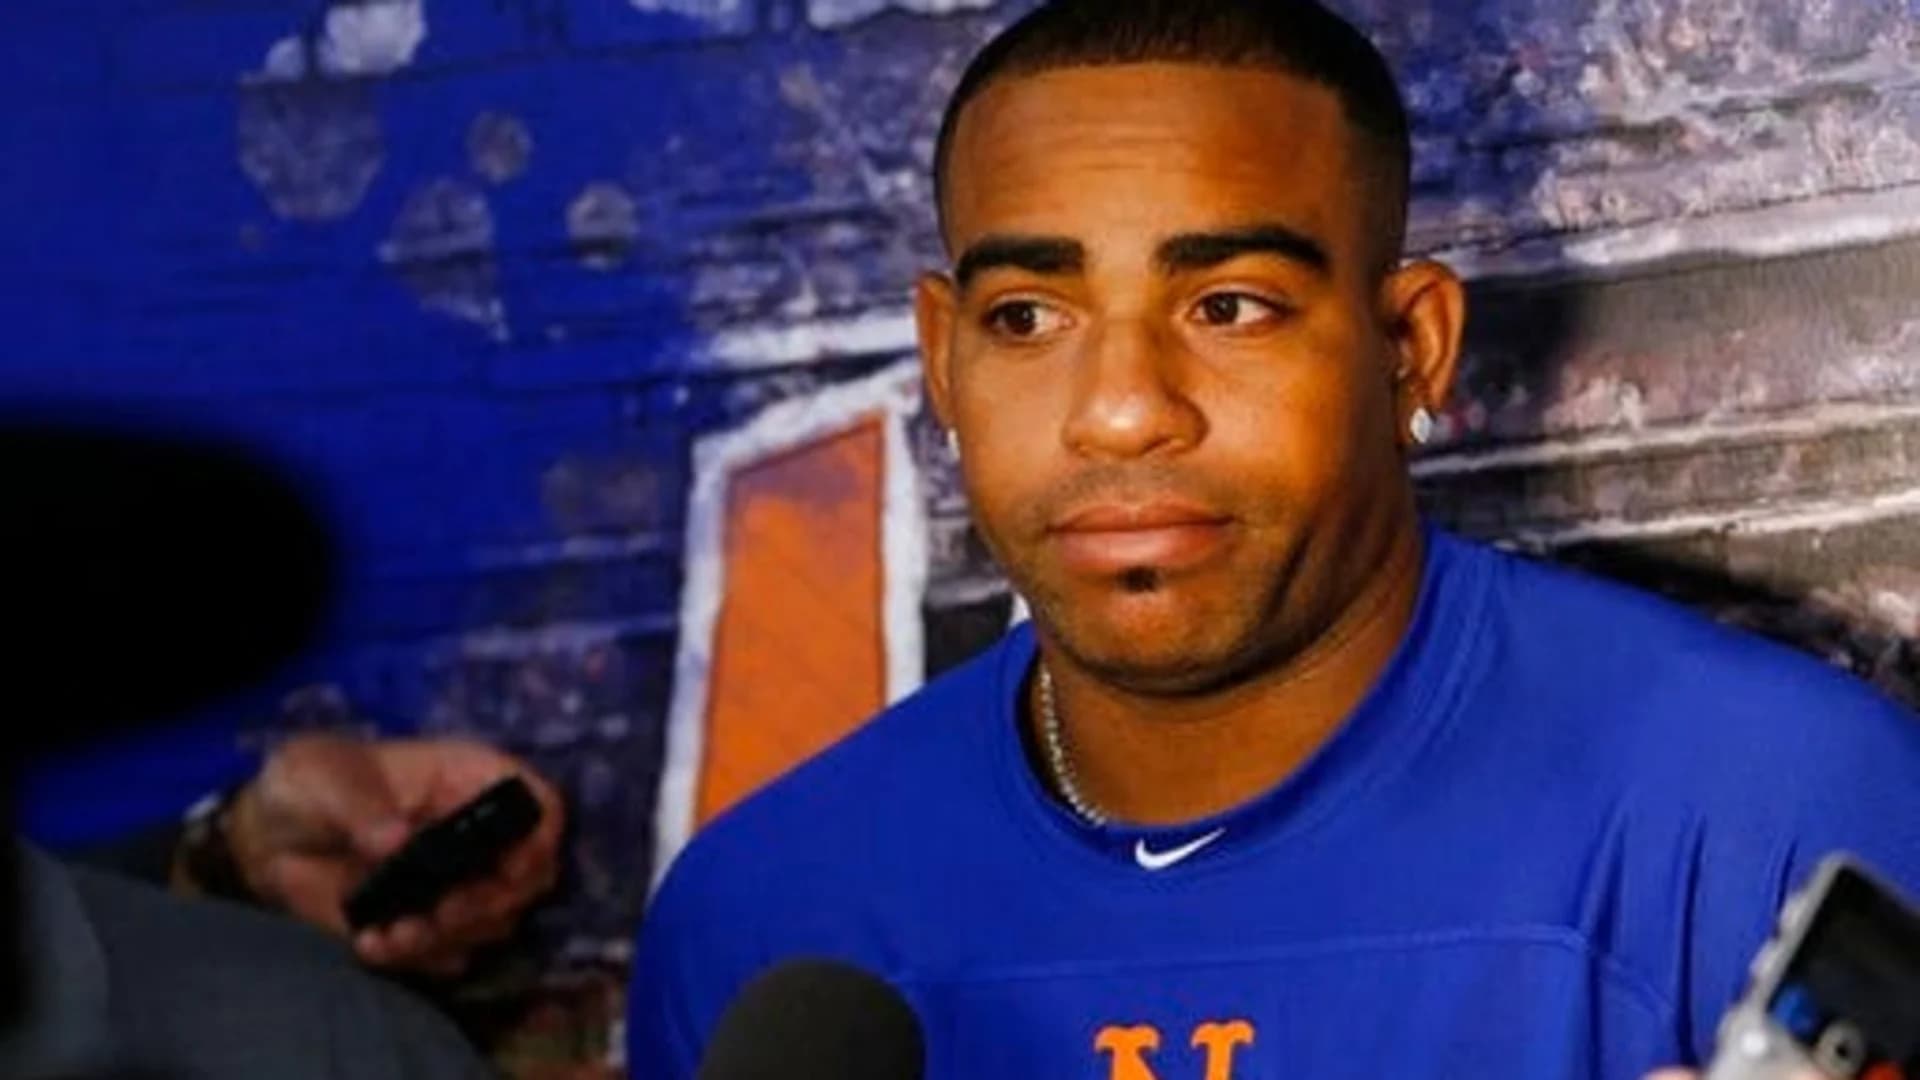 Report: Cespedes' ankle fracture caused by wild boar encounter